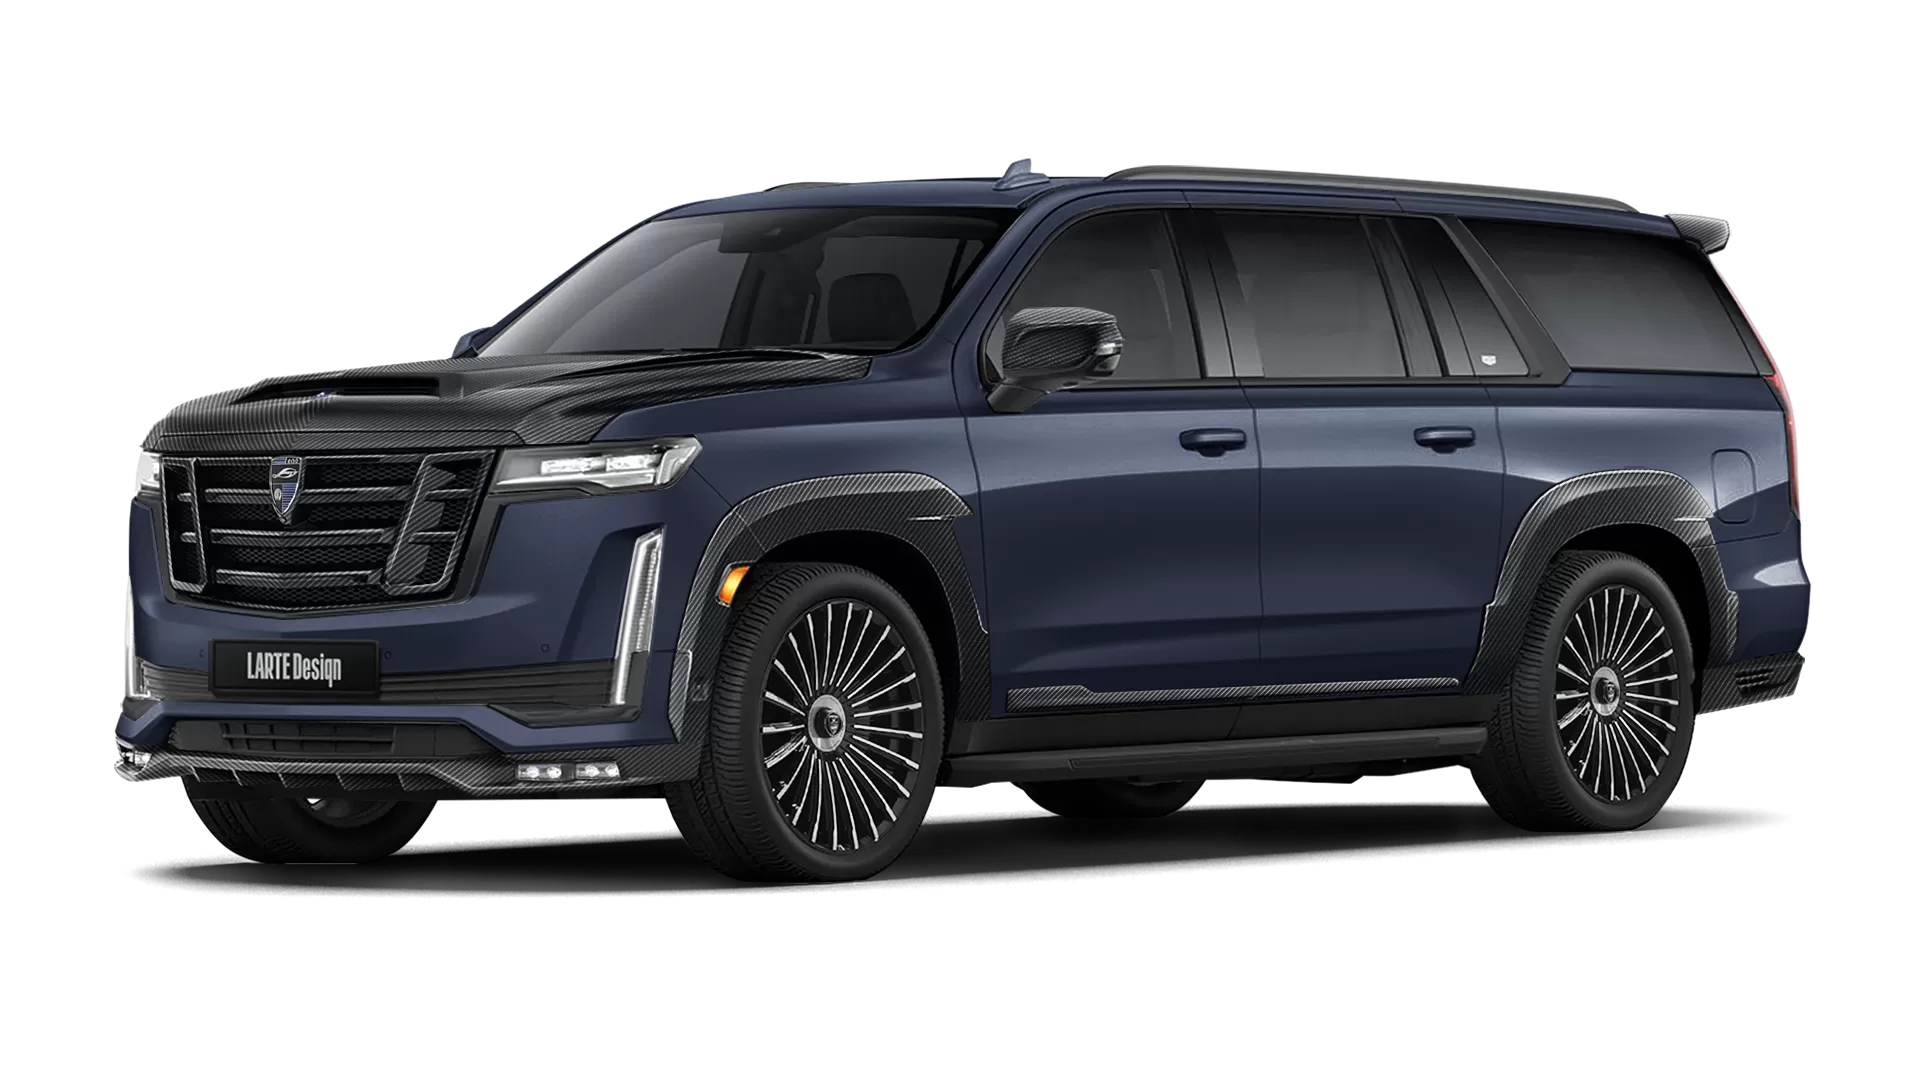 Cadillac Escalade ESV GMT 1XX with carbon body kit: front view shown in Dark Moon Blue